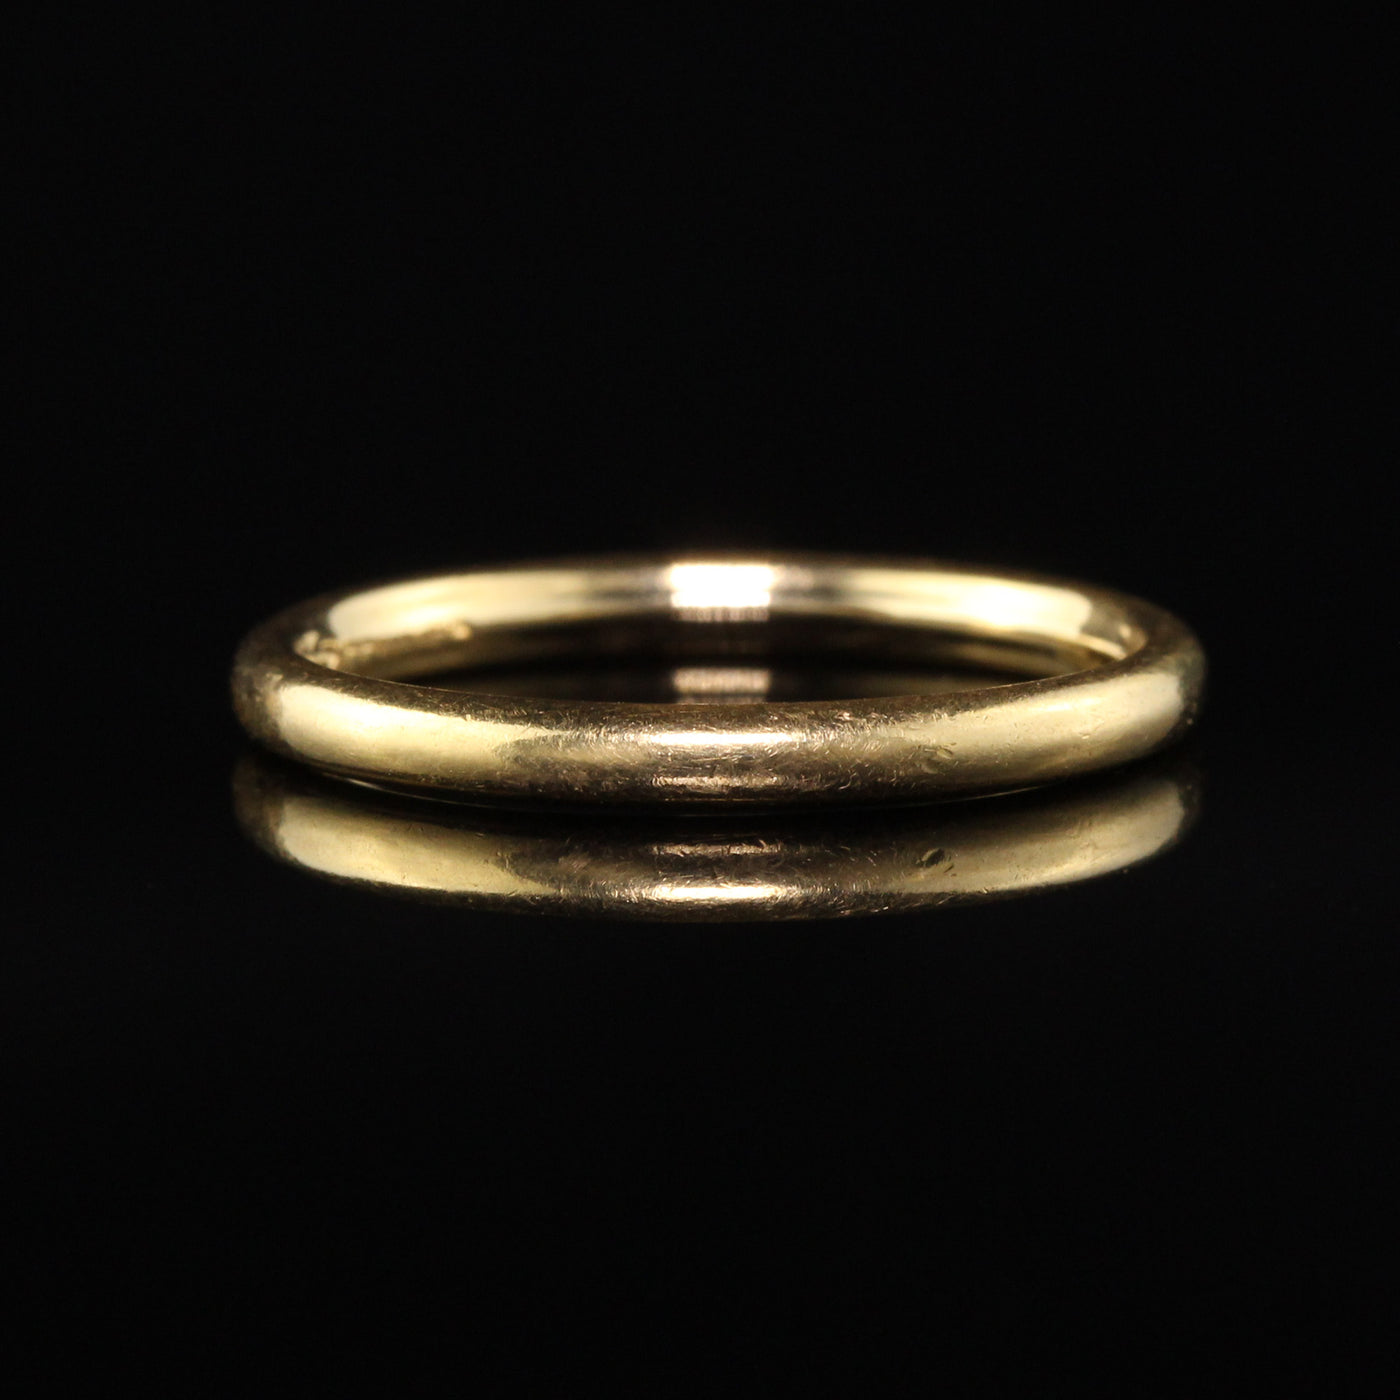 Antique Art Deco Tiffany and Co 18K Yellow Gold Wedding Band - Size 6 1/2